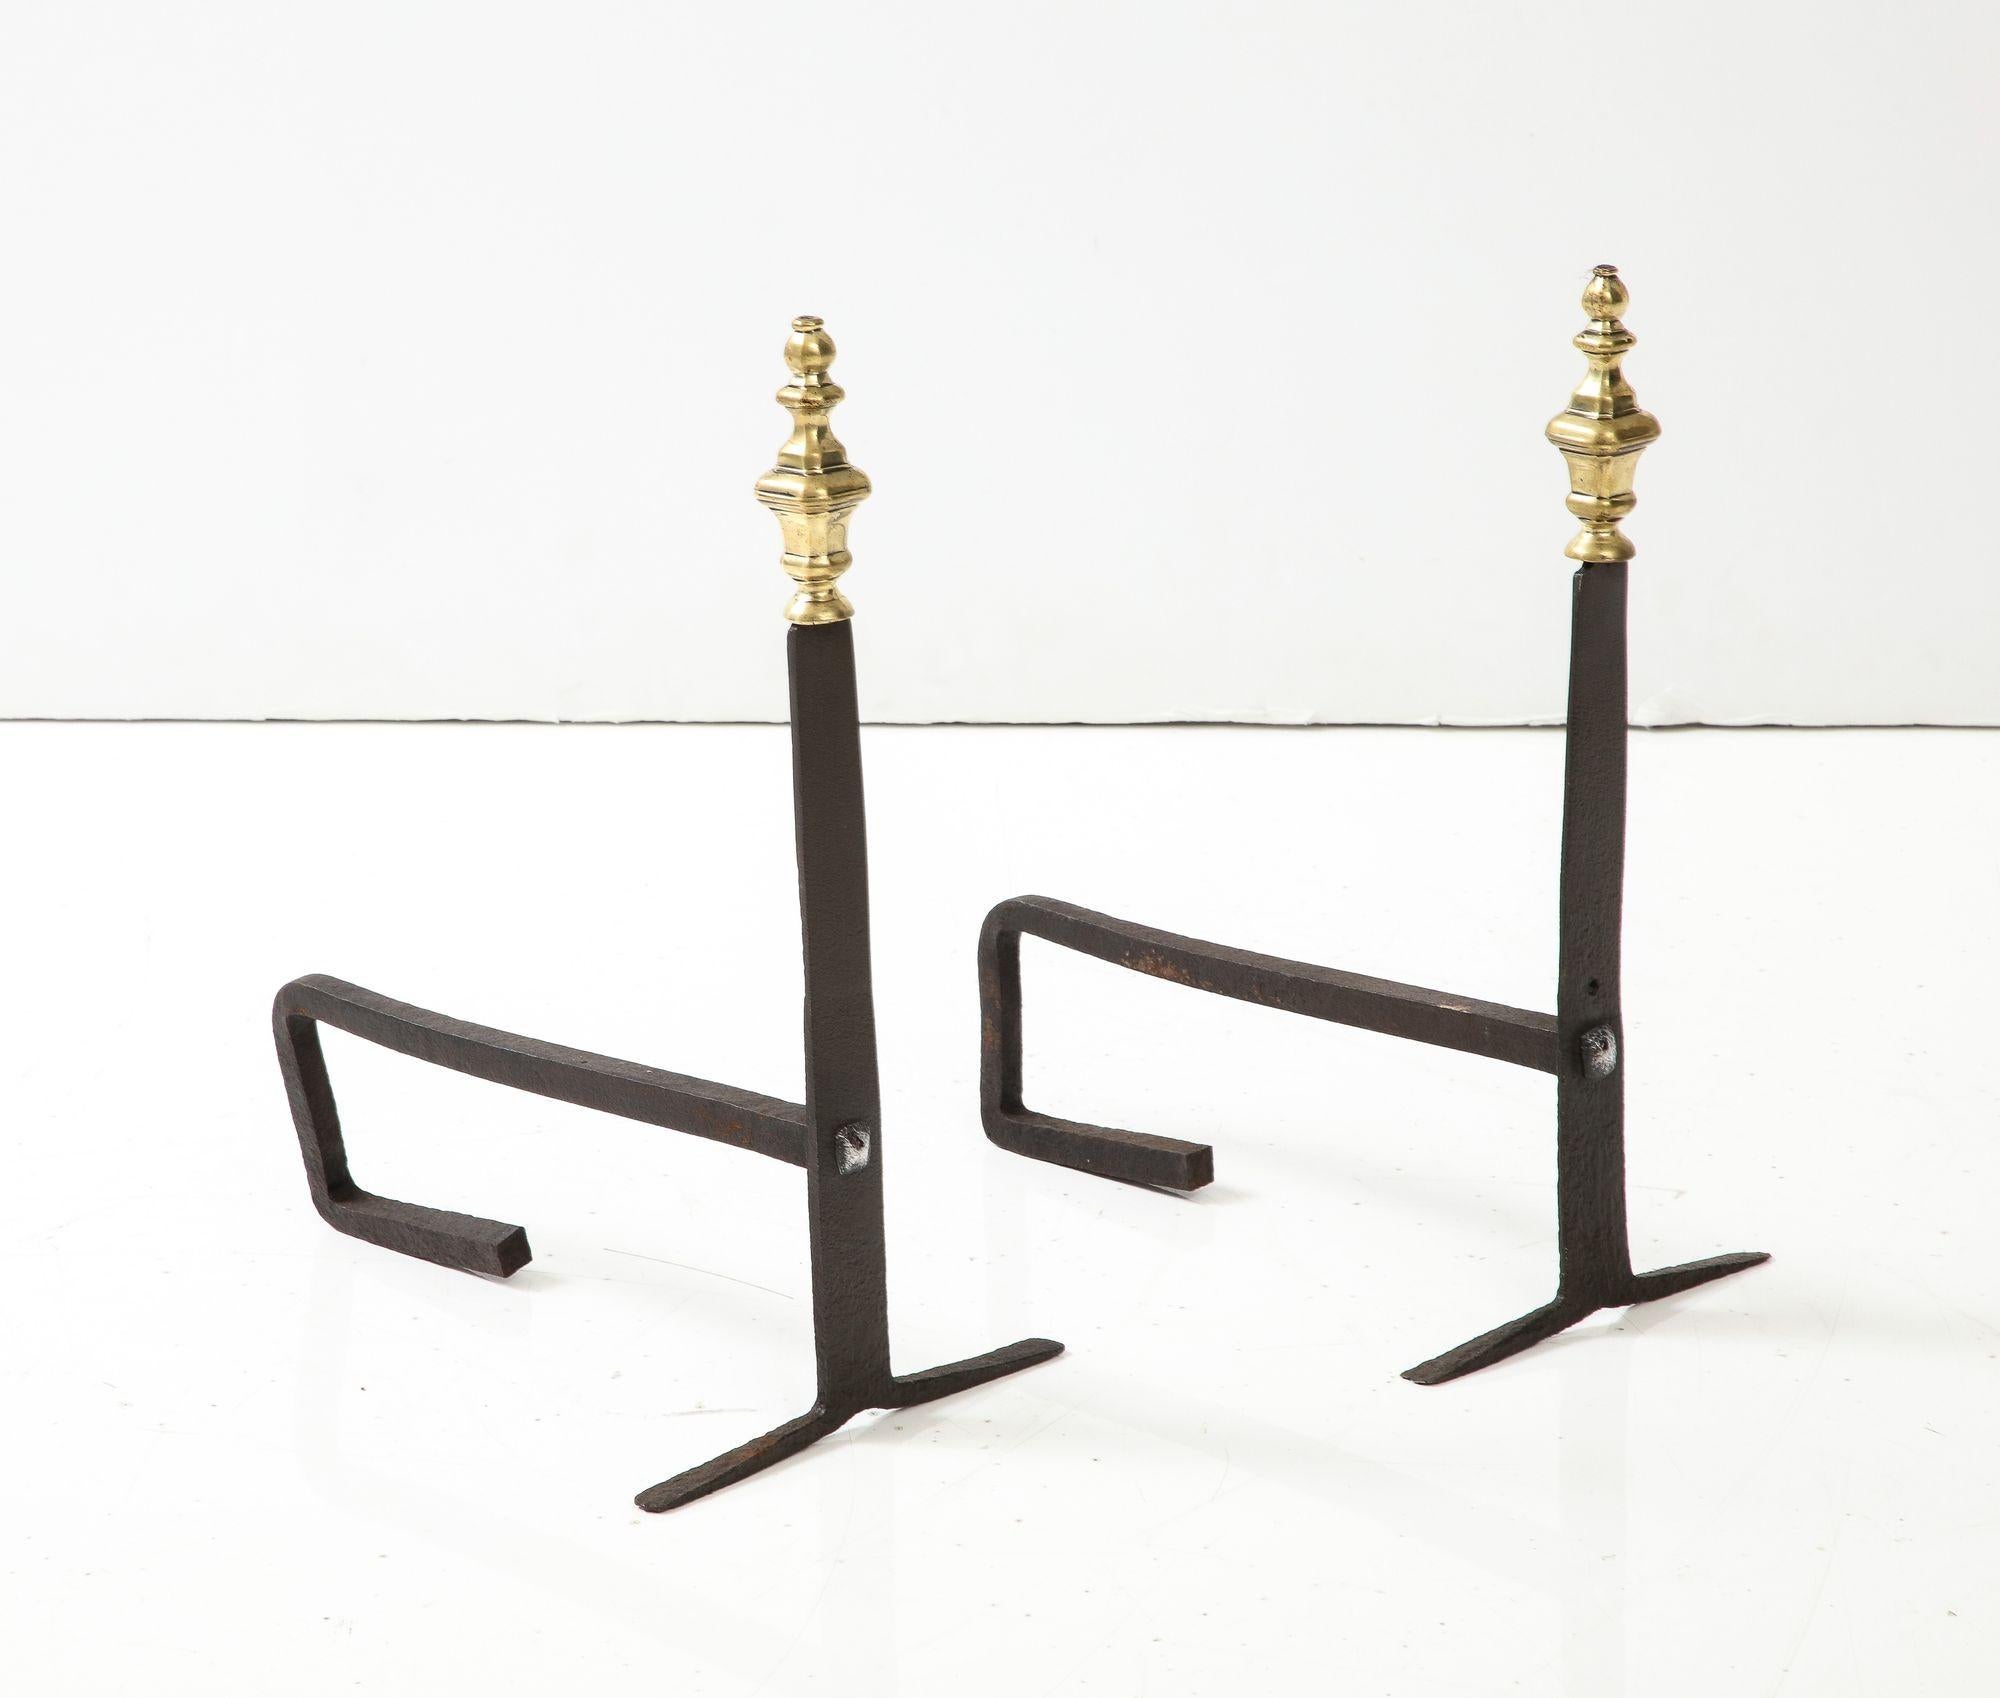 Good pair of 18th century brass and wrought iron steeple top andirons with unusual flat penny foot, English or American circa 1760.